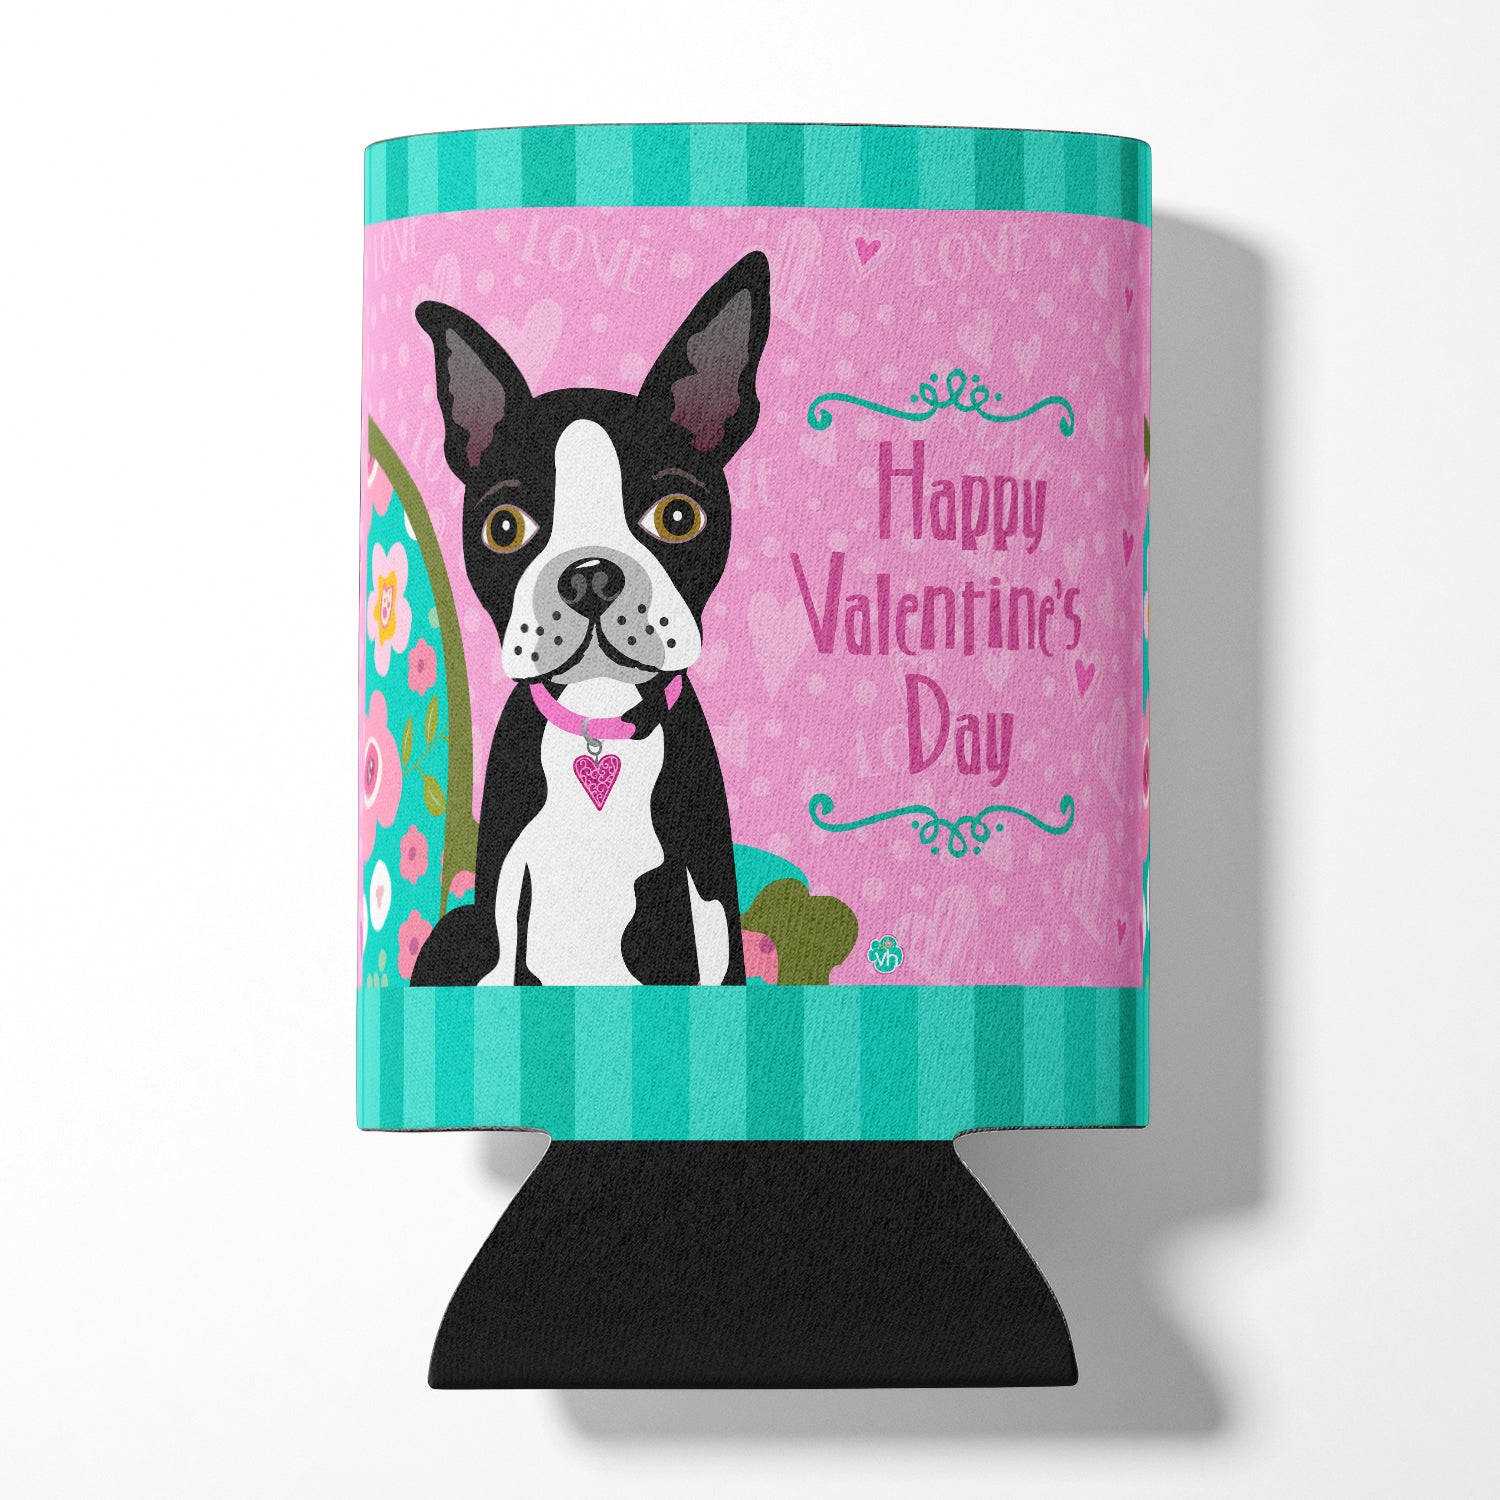 Happy Valentine's Day Boston Terrier Can or Bottle Hugger VHA3001CC